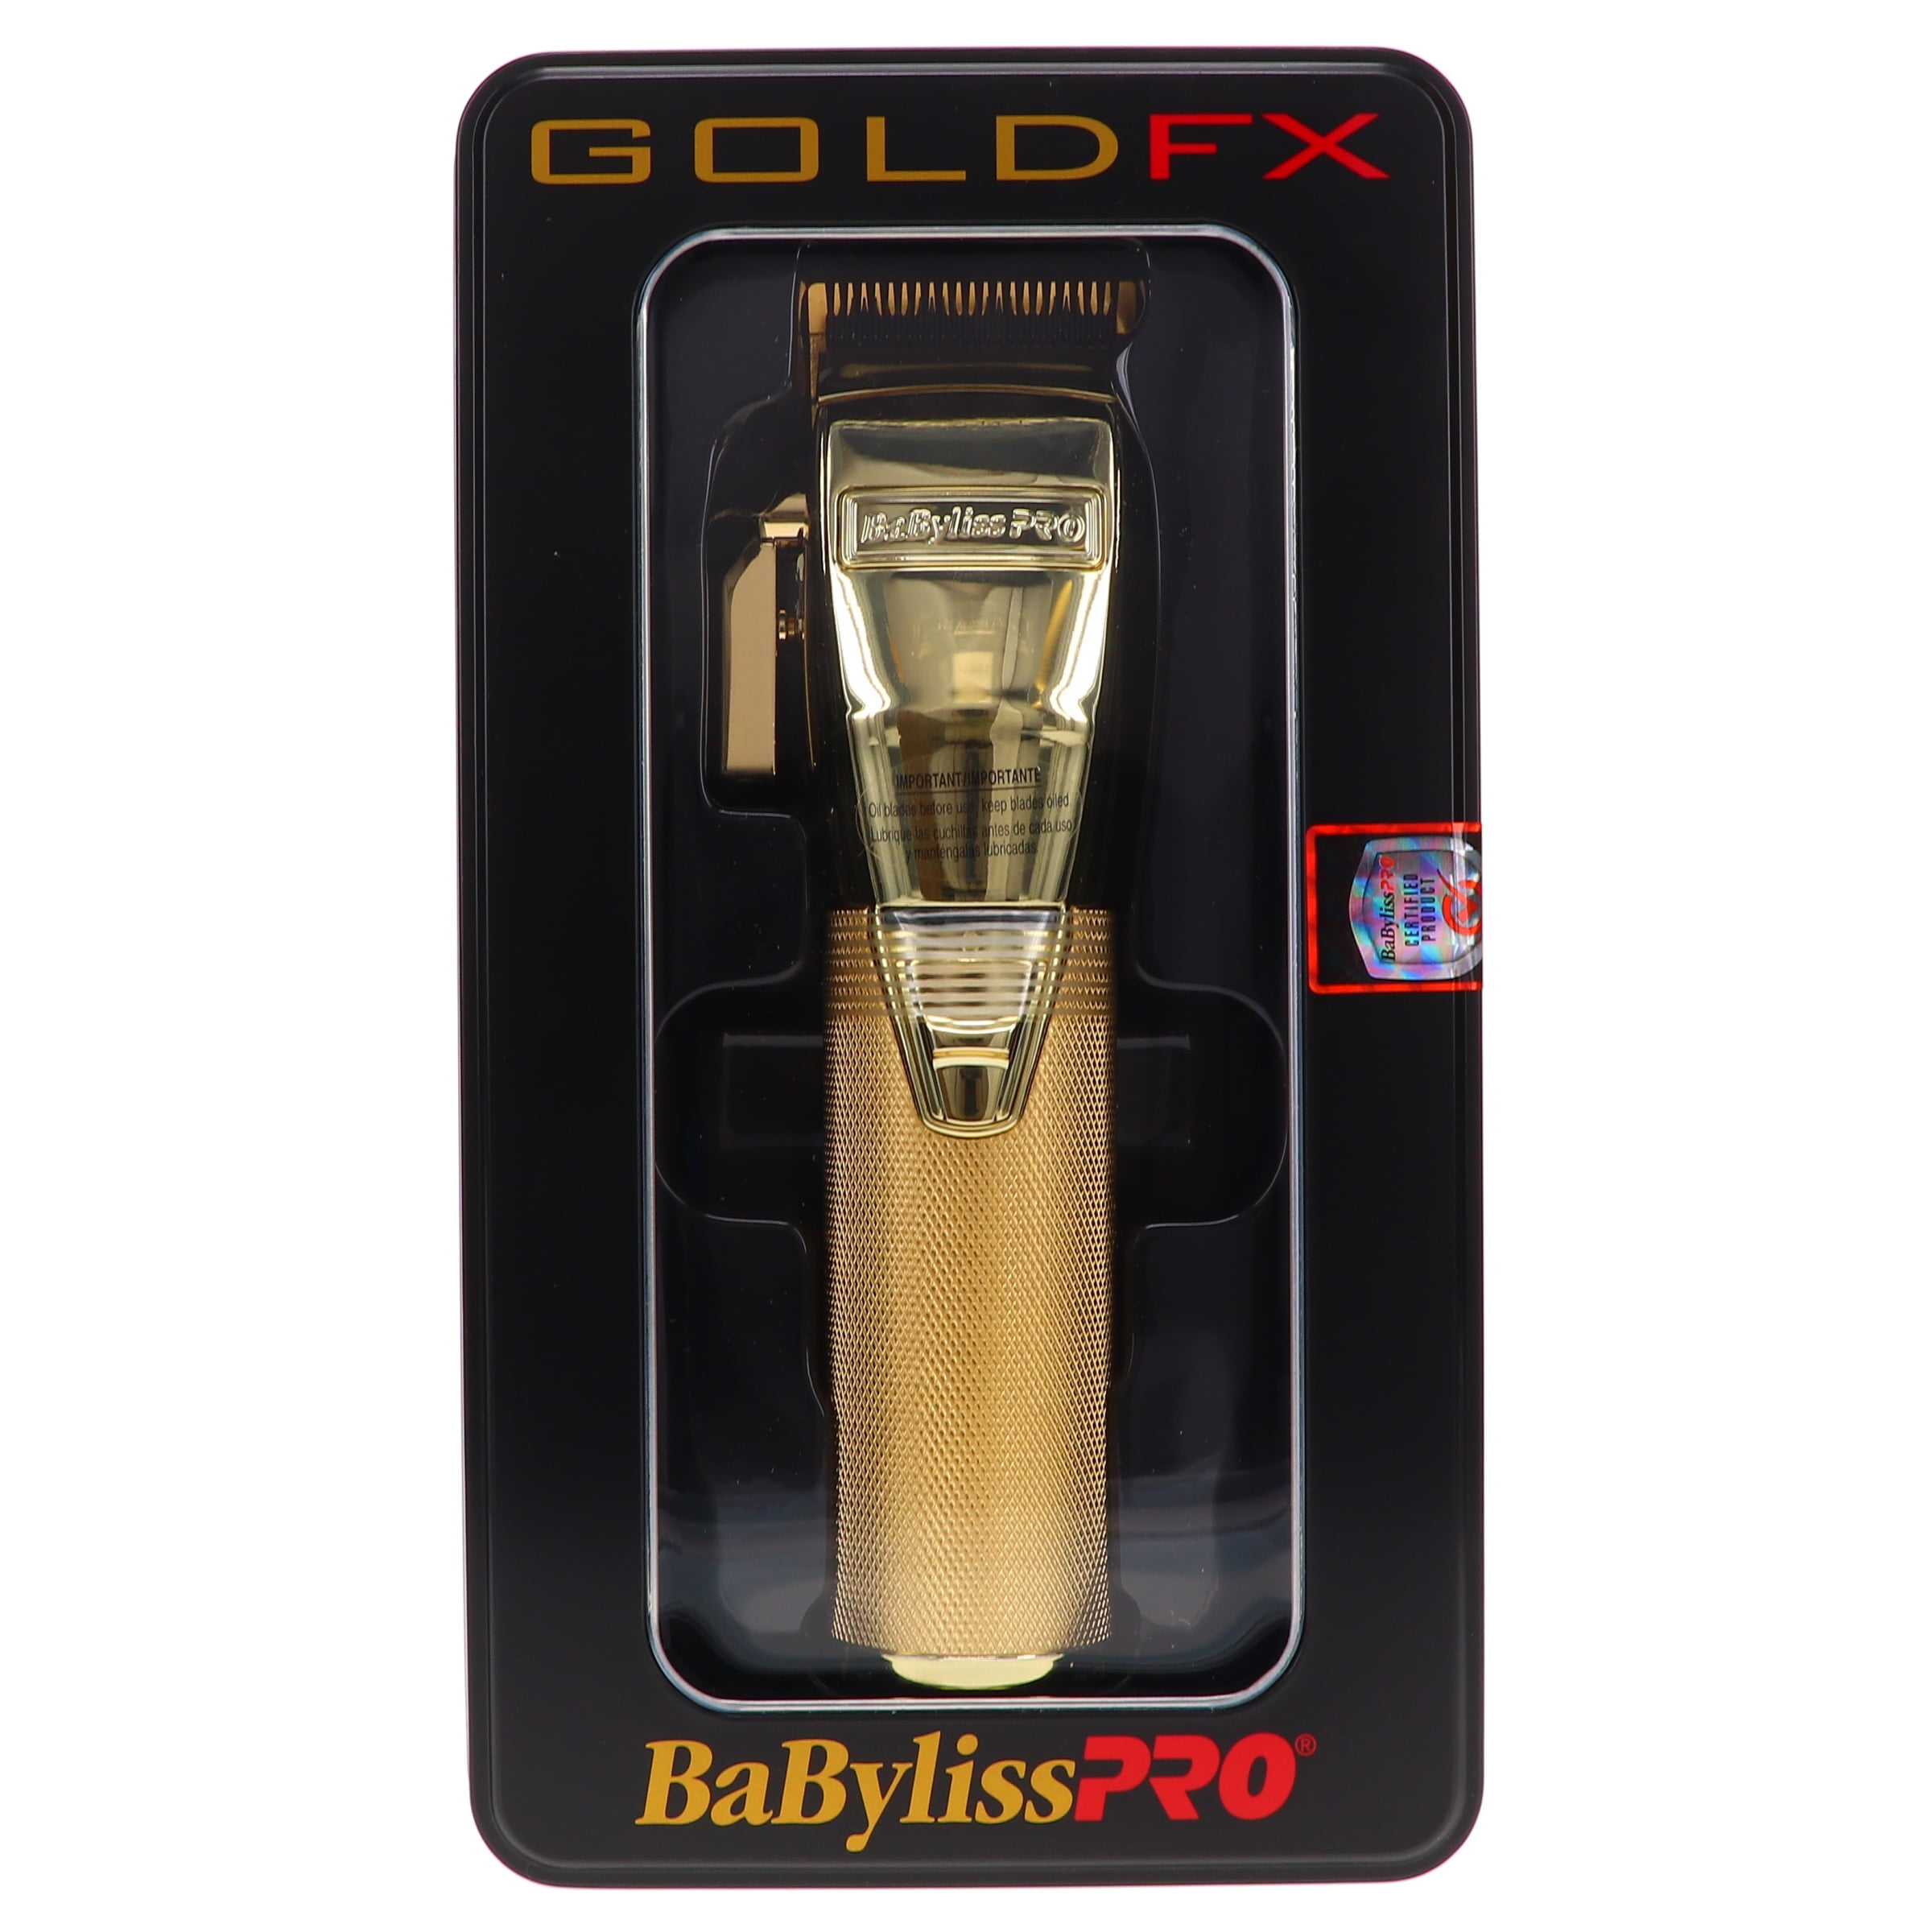 gold babyliss clippers